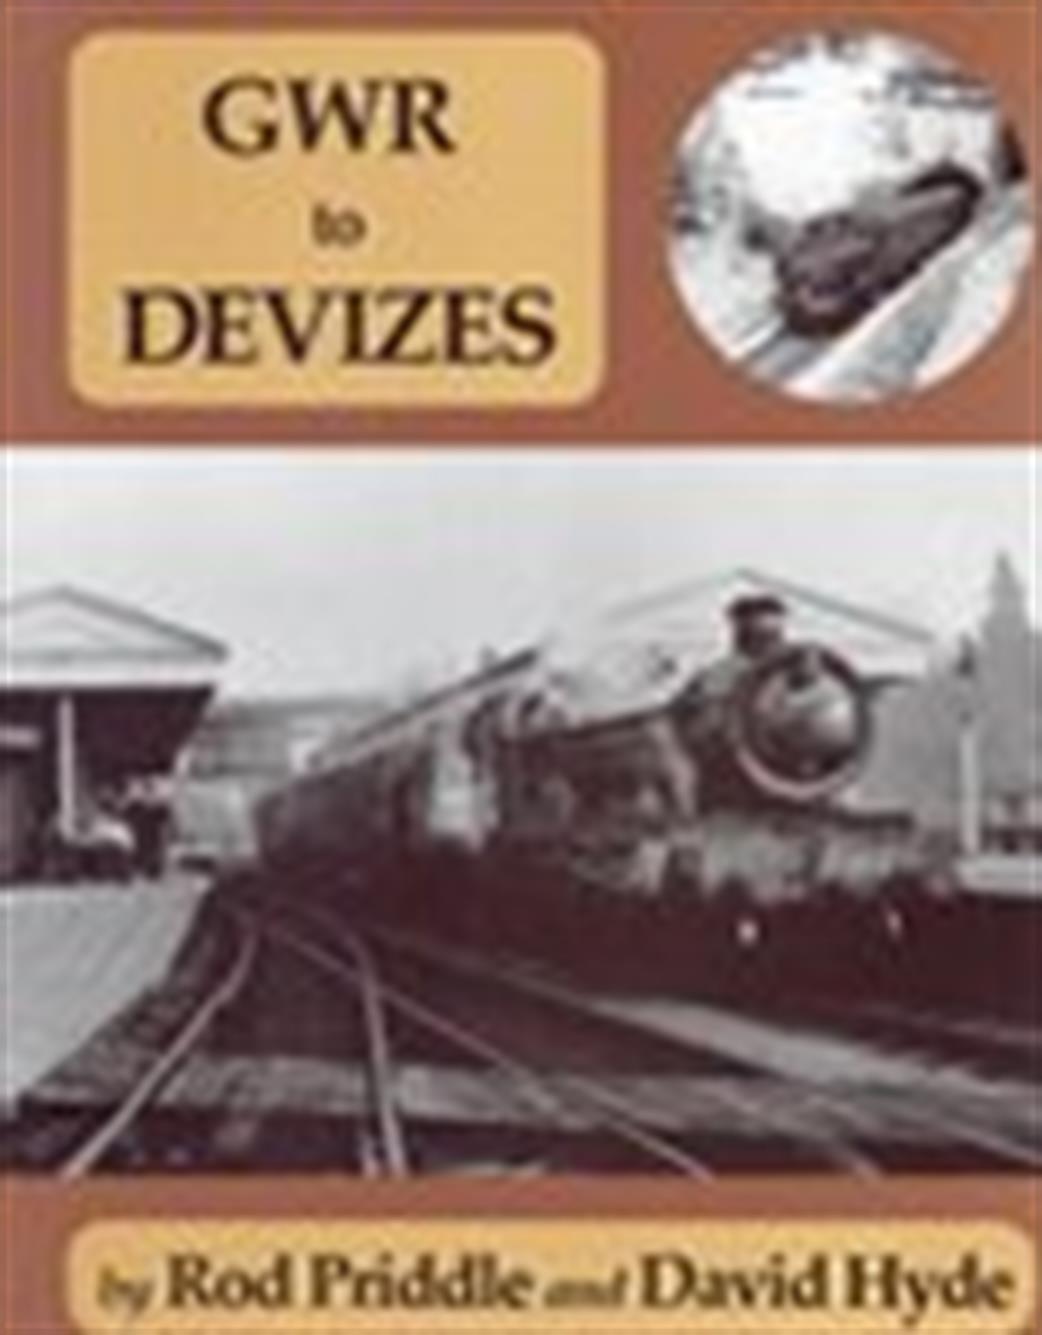 9780948975431 GWR to Devizes By Rod Priddle & David Hyde